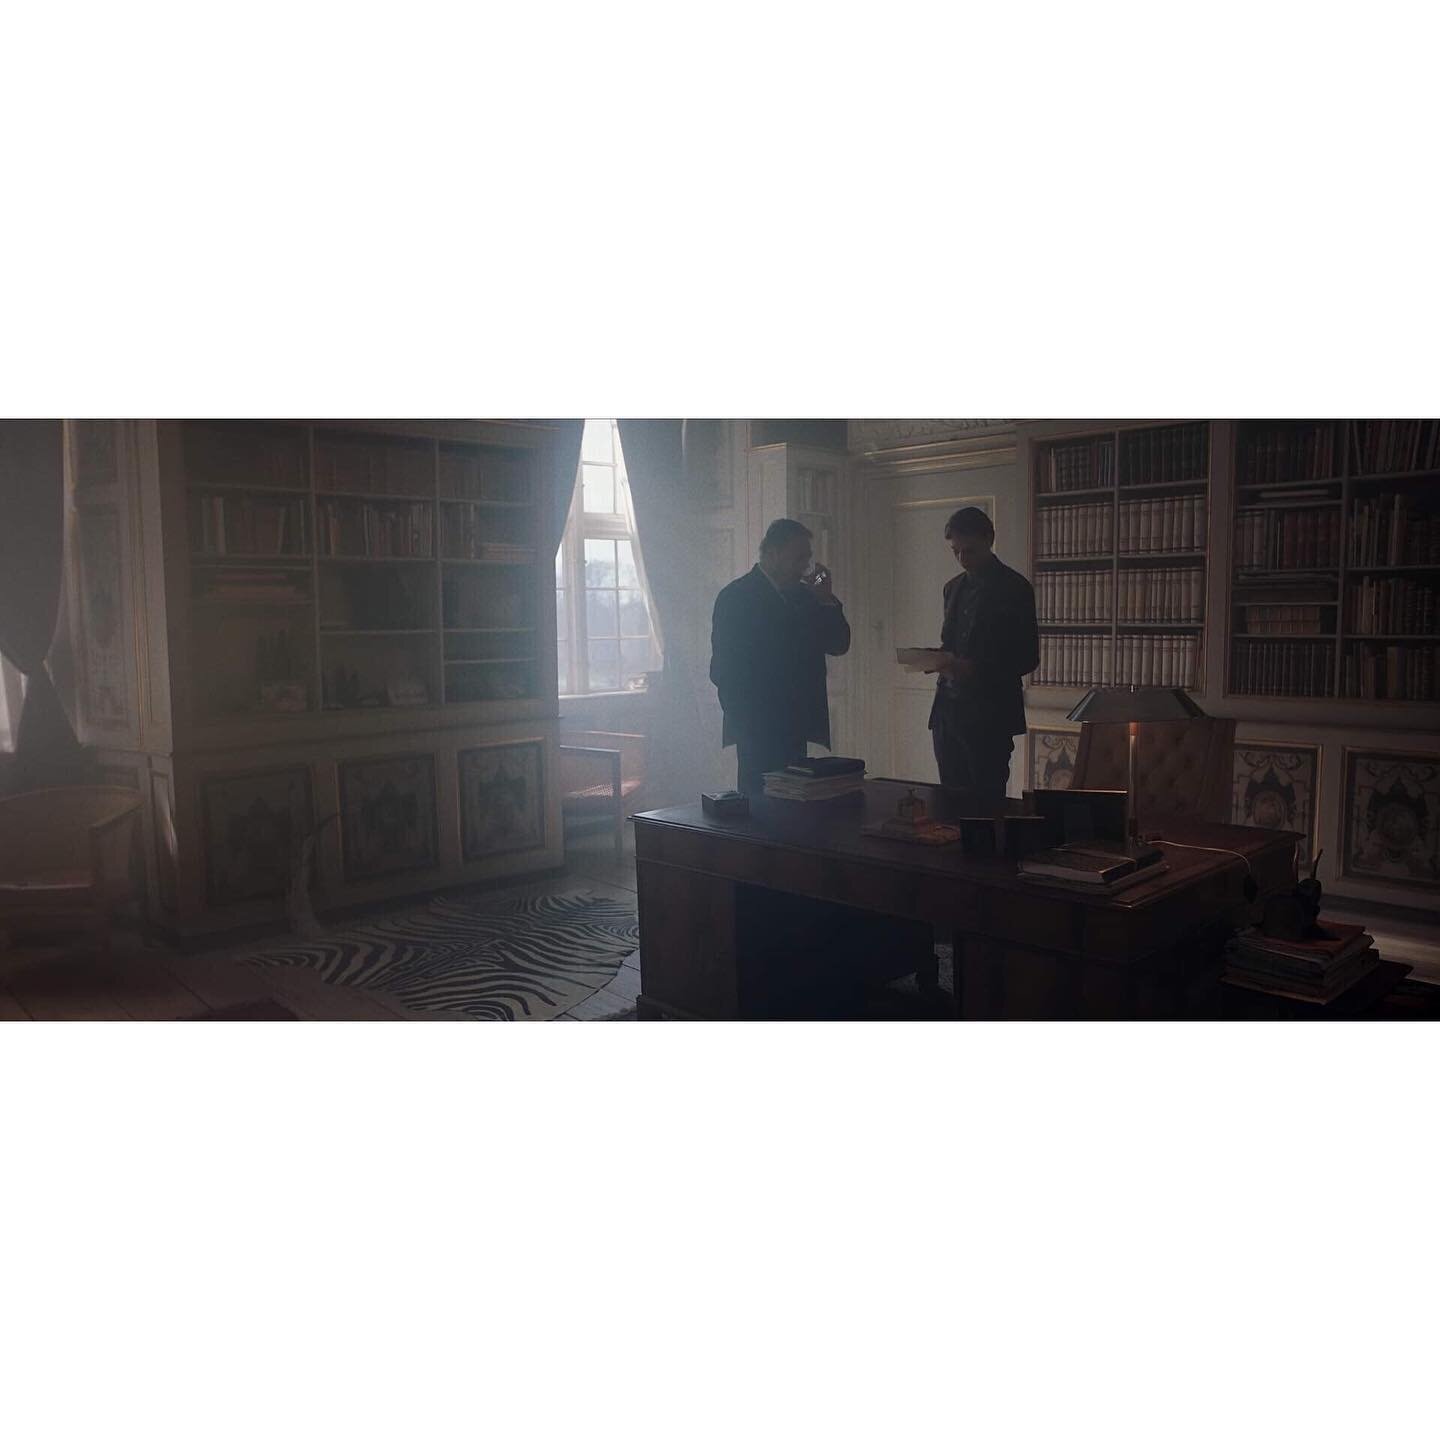 KOLLISION | Dir. @mehdiavaz |#tommykenter and @albruli in the shadows. #cinematography